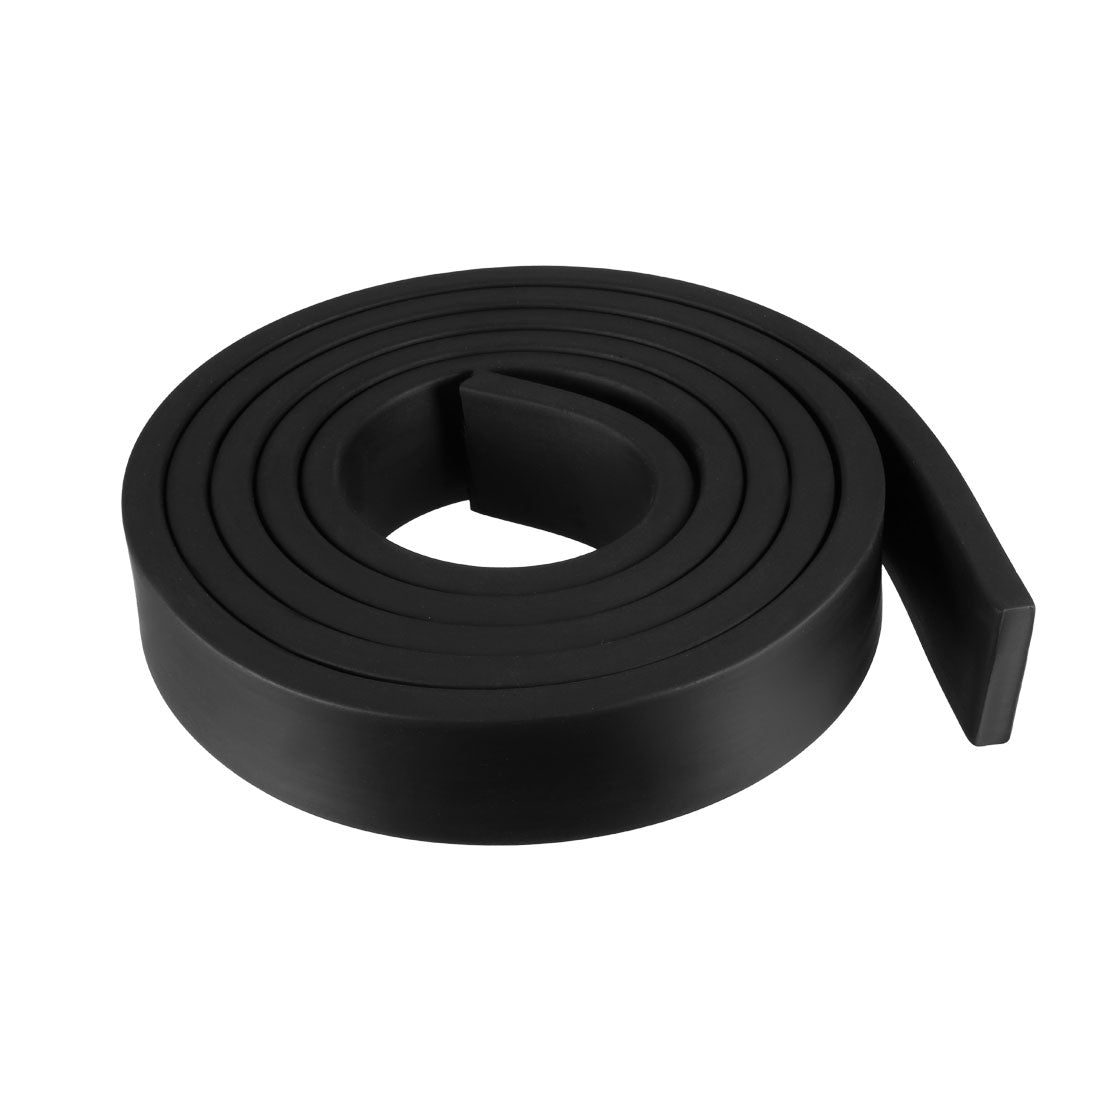 uxcell Uxcell Solid Rectangle Rubber Seal Strip 35mm Wide 10mm Thick, 2 Meters Long Black